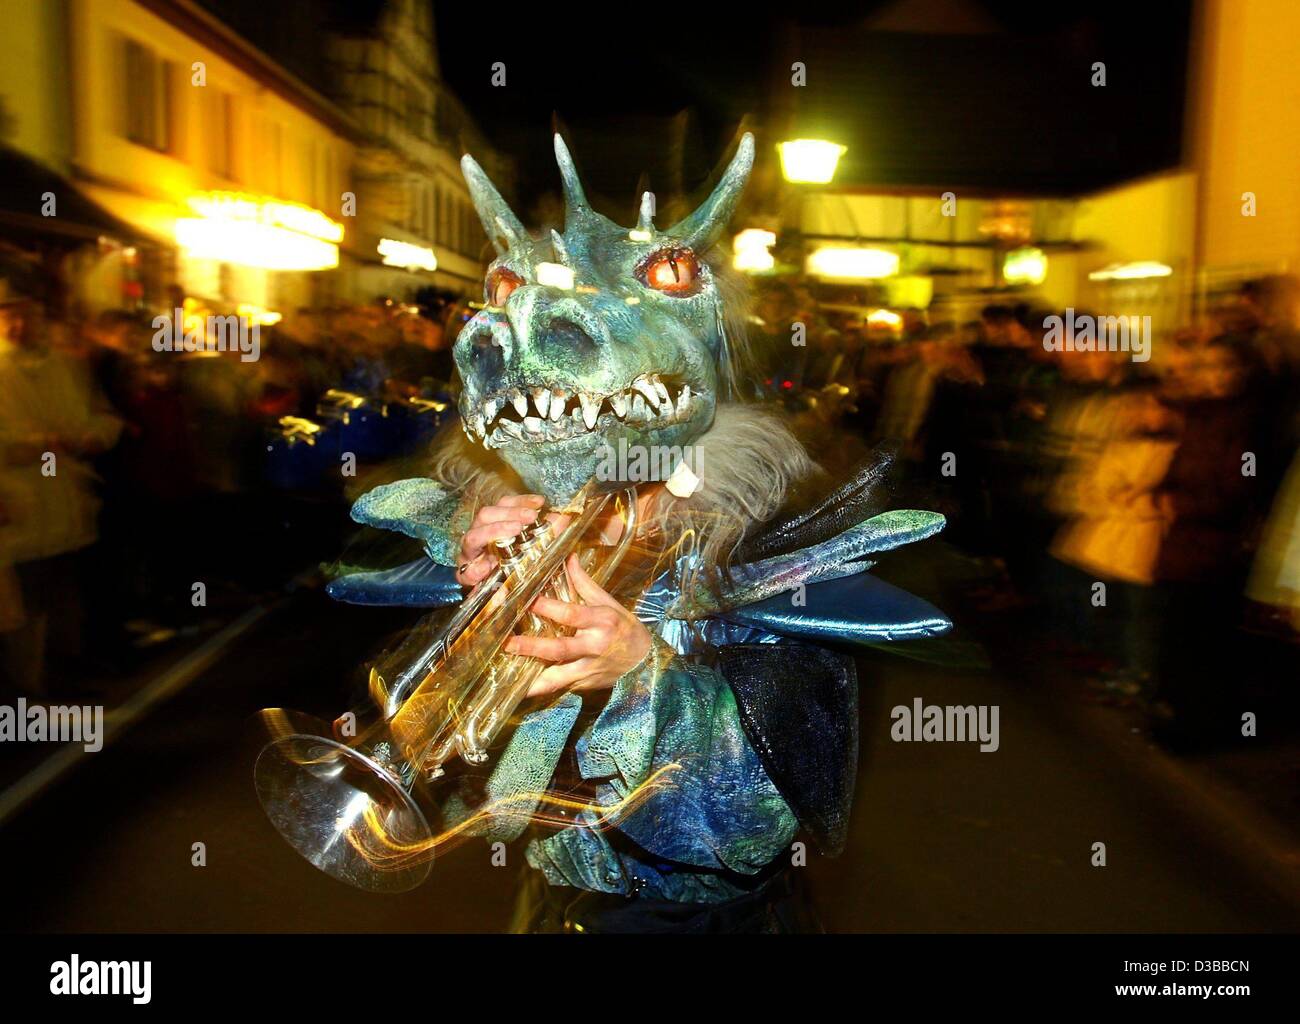 (dpa) - During the international Guggen Music festival a musician marches in a colourful costume through the streets of Bad Breisig, Germany, 9 November 2002. Some 1000 participants from Germany, Austria and Switzerland took part in the festival. 'Gugaaggeri Musig' is originally a characteristic fea Stock Photo